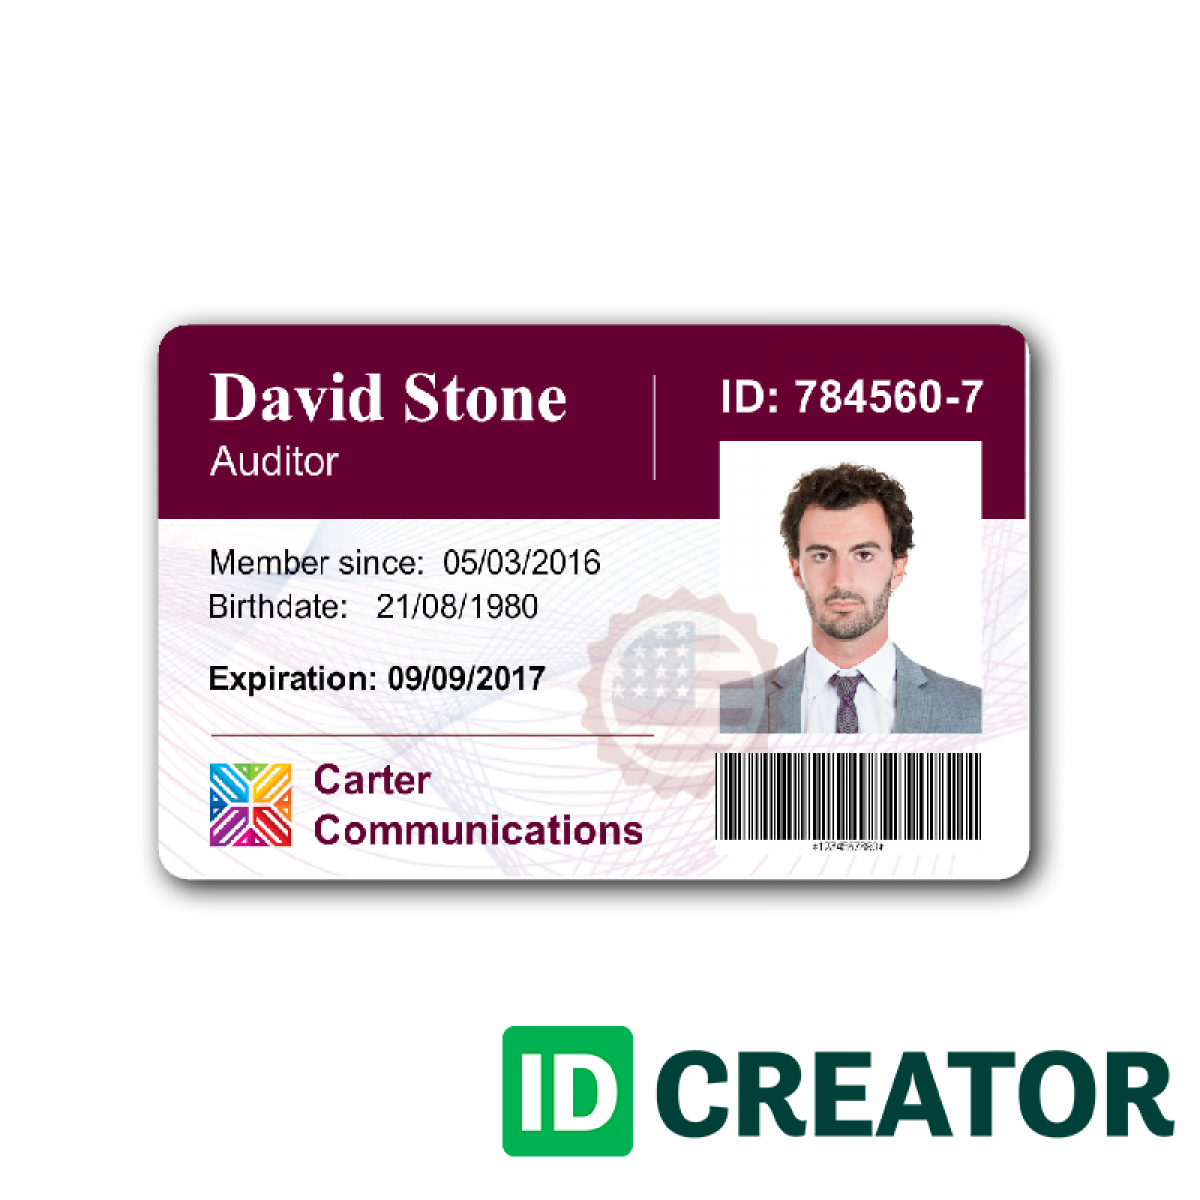 90 Format Make An Id Card Template With Stunning Design by Make An Id Card Template